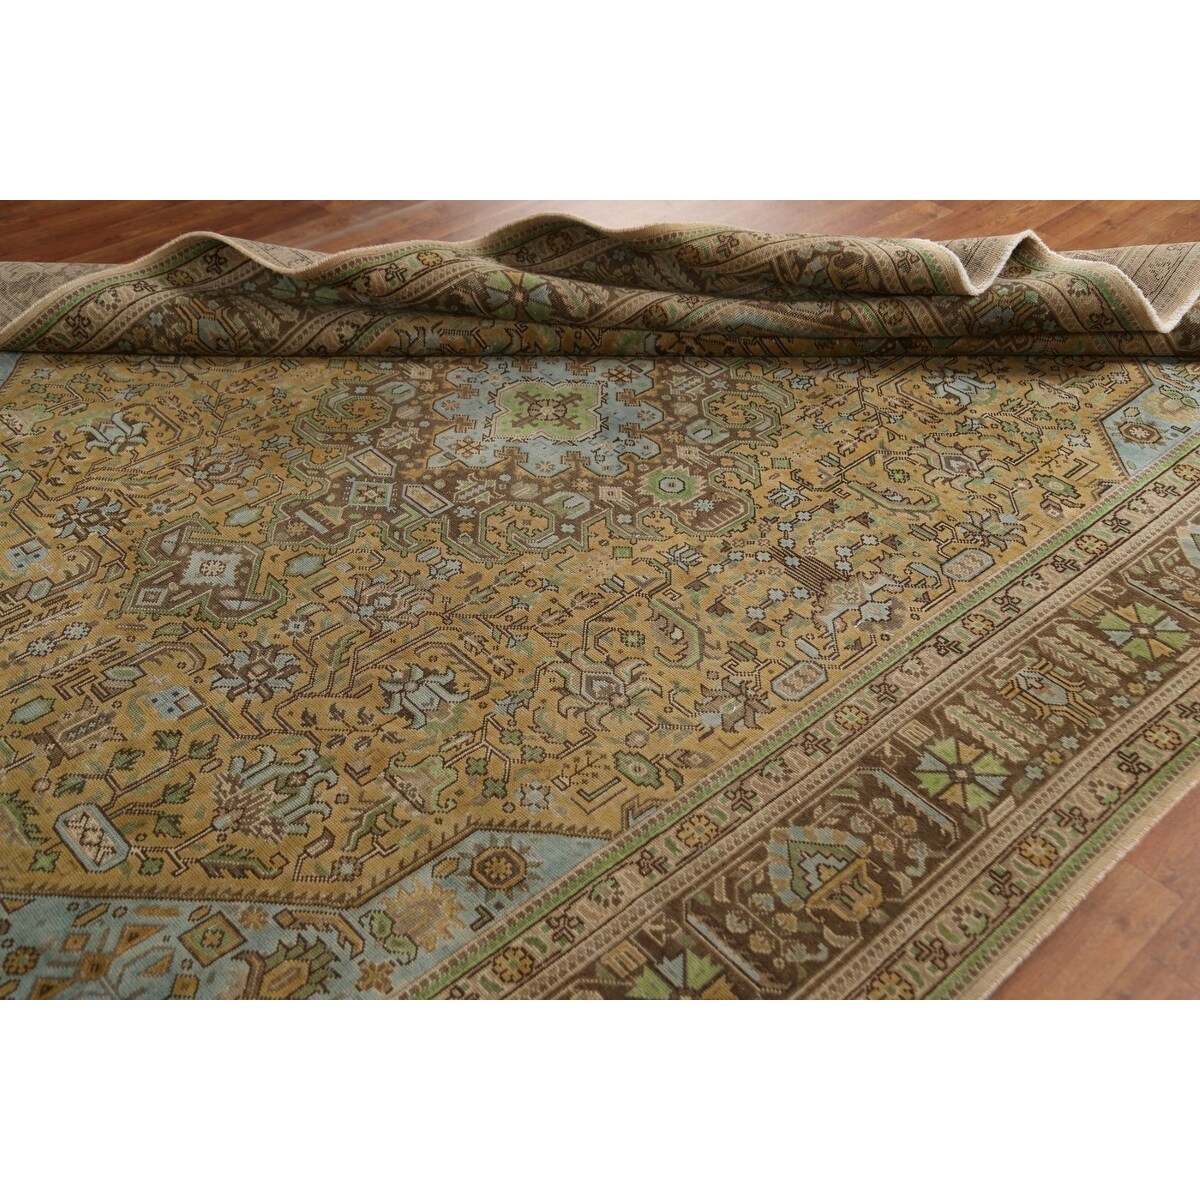 https://ak1.ostkcdn.com/images/products/is/images/direct/234891e0187121dfd4f07361135719446db65bff/Vintage-Over-dyed-Tabriz-Persian-Area-Rug-Hand-knotted-Wool-Carpet.jpg